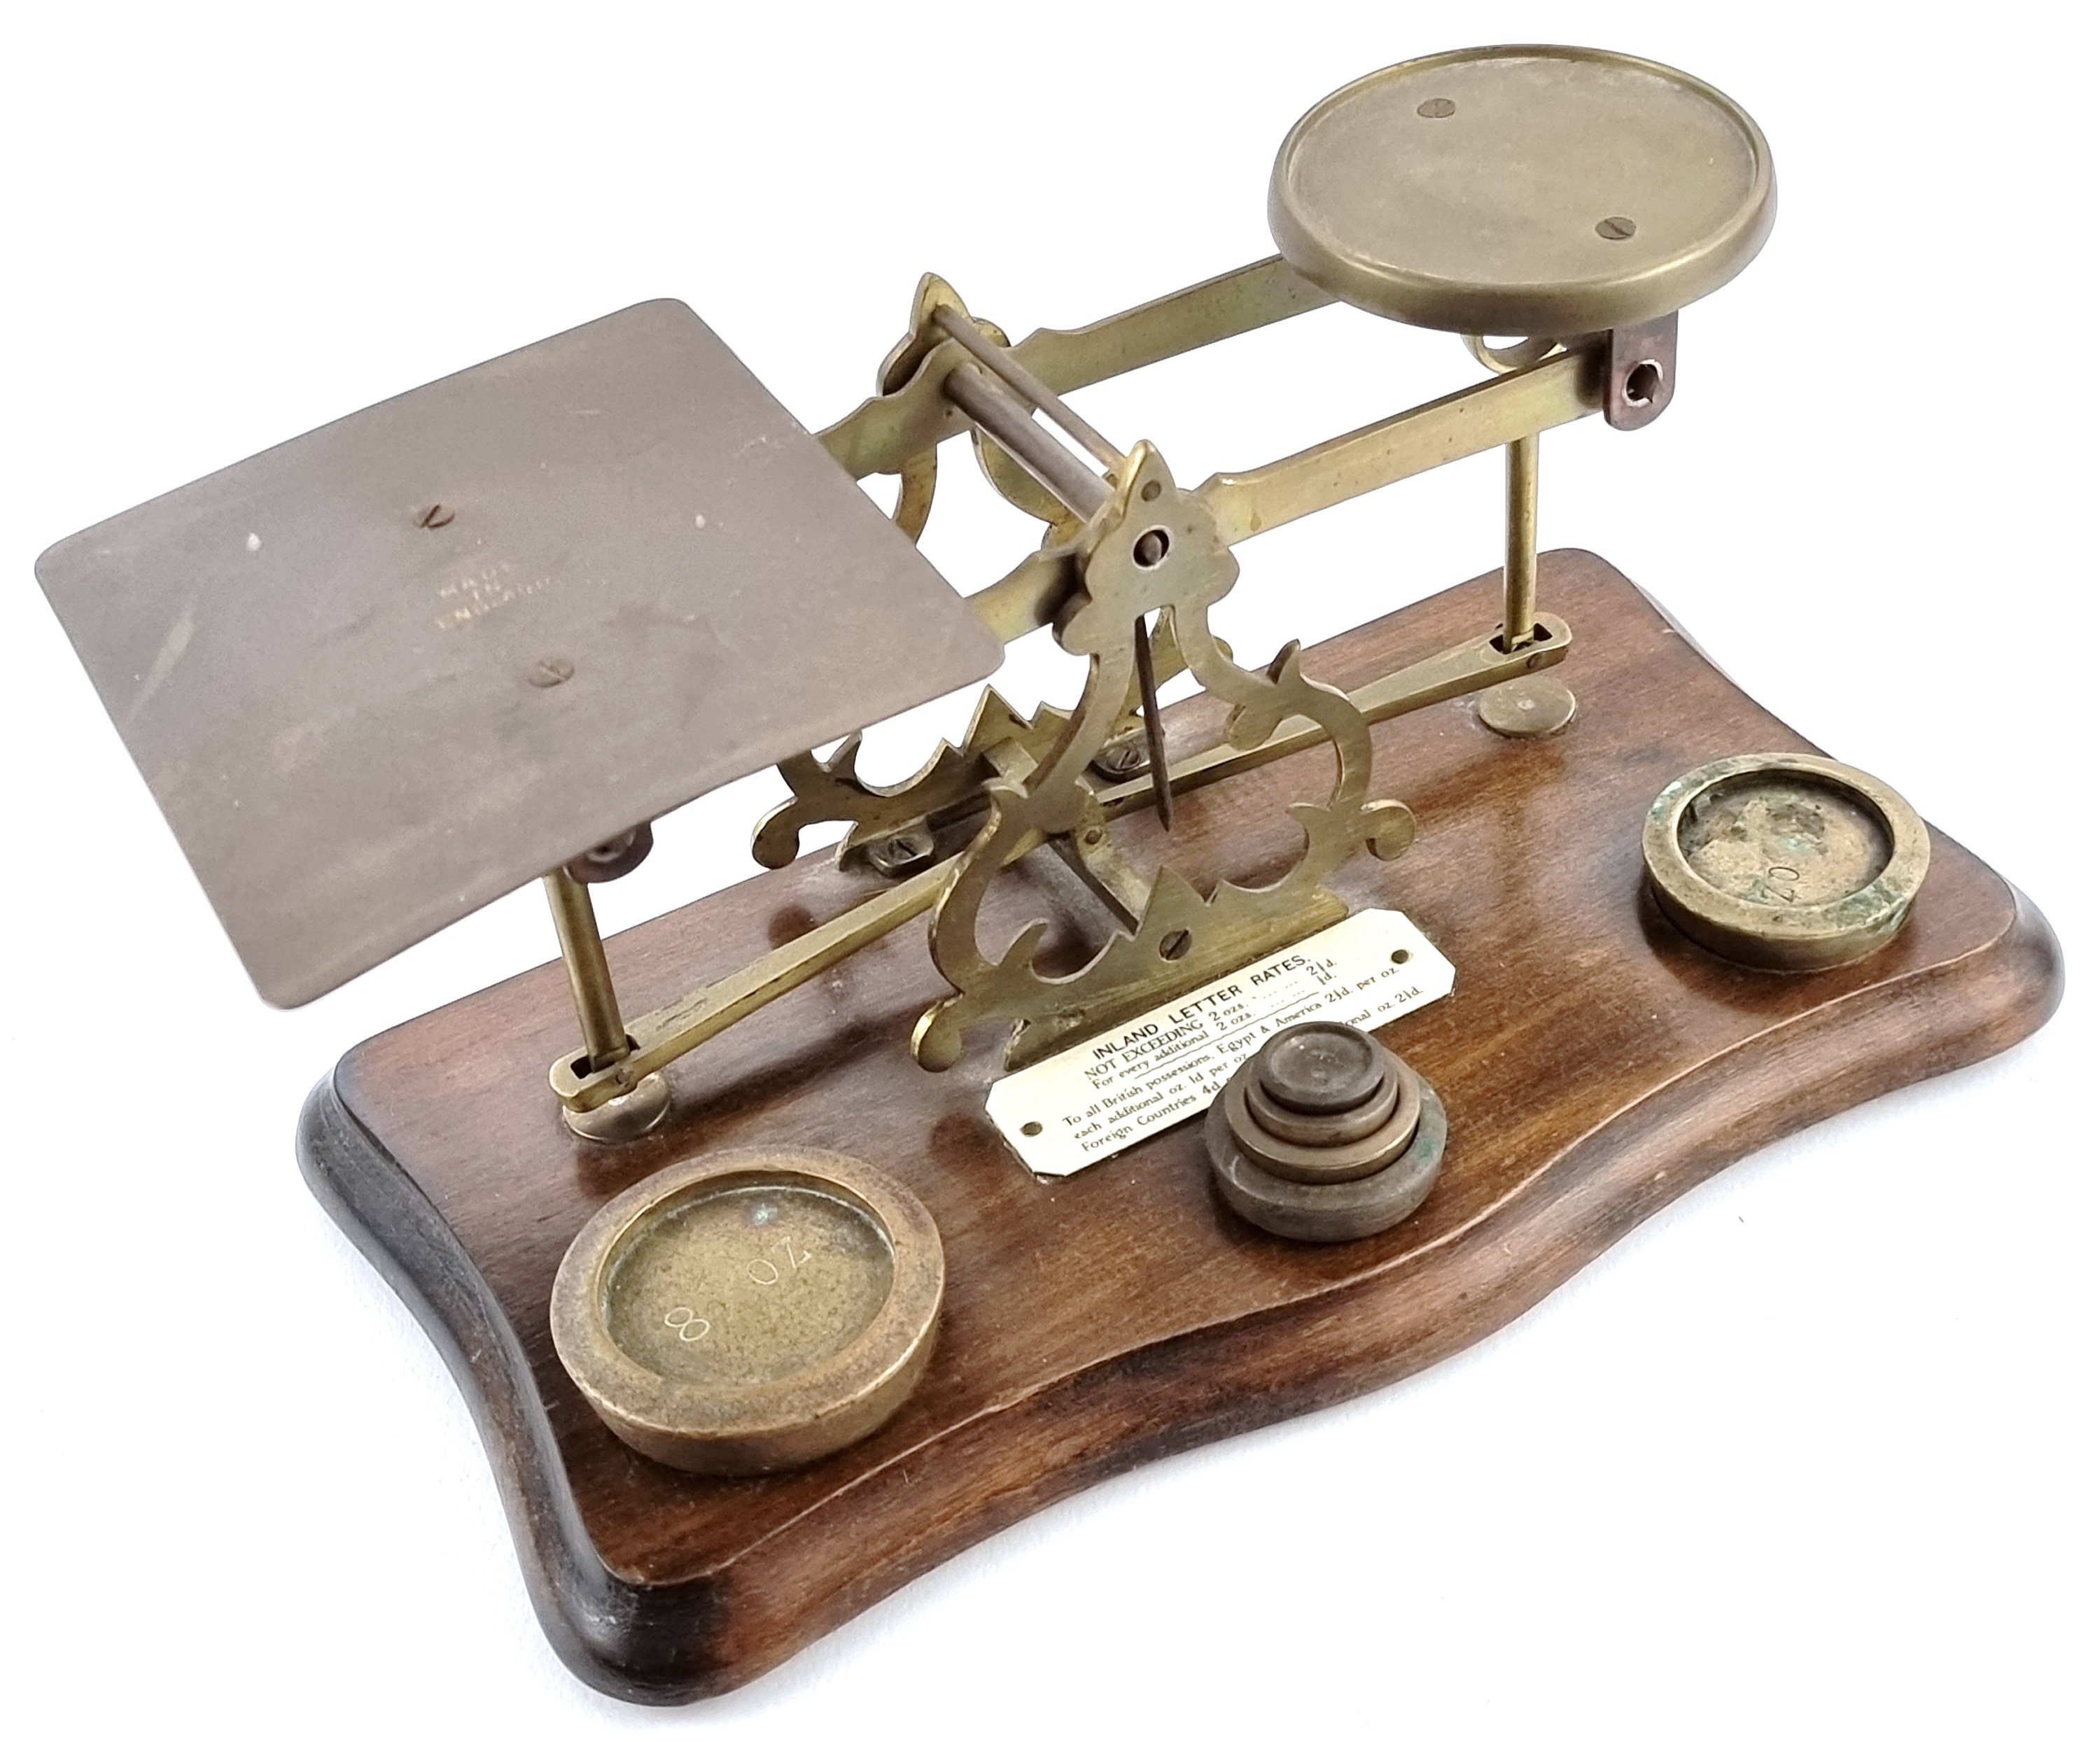 Antique Postal Scales, Letter Scales, Inland Letters, Scales With Weights,  8 Ounce Weight, Wood and Brass, Industrial Look, Desk Feature 